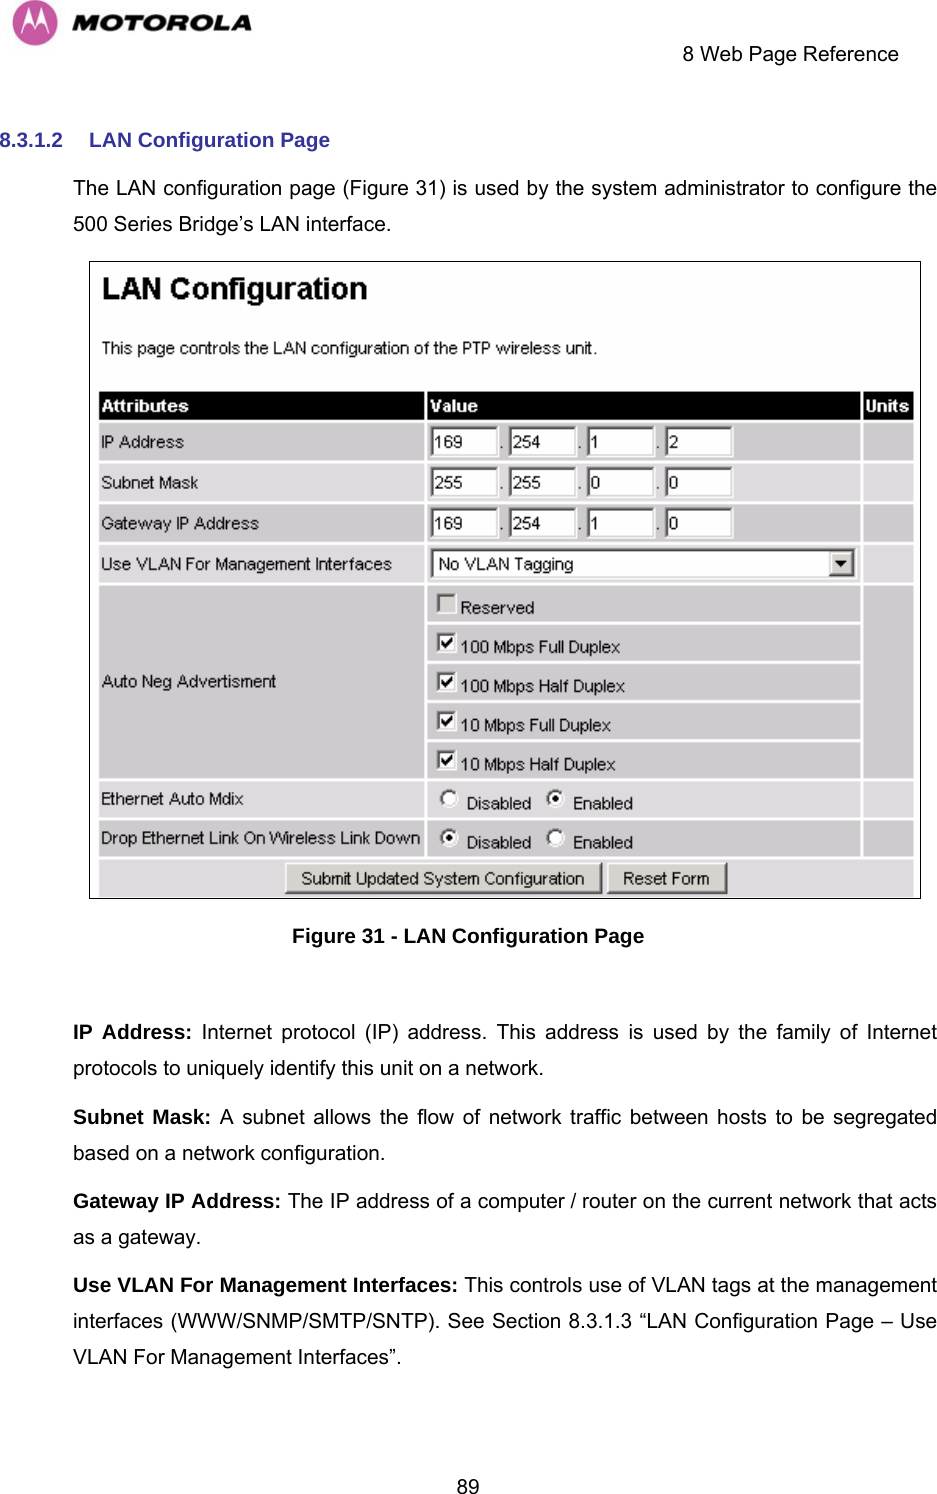     8 Web Page Reference  898.3.1.2  LAN Configuration Page The LAN configuration page (Figure 31) is used by the system administrator to configure the 500 Series Bridge’s LAN interface.  Figure 31 - LAN Configuration Page  IP Address: Internet protocol (IP) address. This address is used by the family of Internet protocols to uniquely identify this unit on a network.  Subnet Mask: A subnet allows the flow of network traffic between hosts to be segregated based on a network configuration.  Gateway IP Address: The IP address of a computer / router on the current network that acts as a gateway. Use VLAN For Management Interfaces: This controls use of VLAN tags at the management interfaces (WWW/SNMP/SMTP/SNTP). See Section 8.3.1.3 “LAN Configuration Page – Use VLAN For Management Interfaces”. 